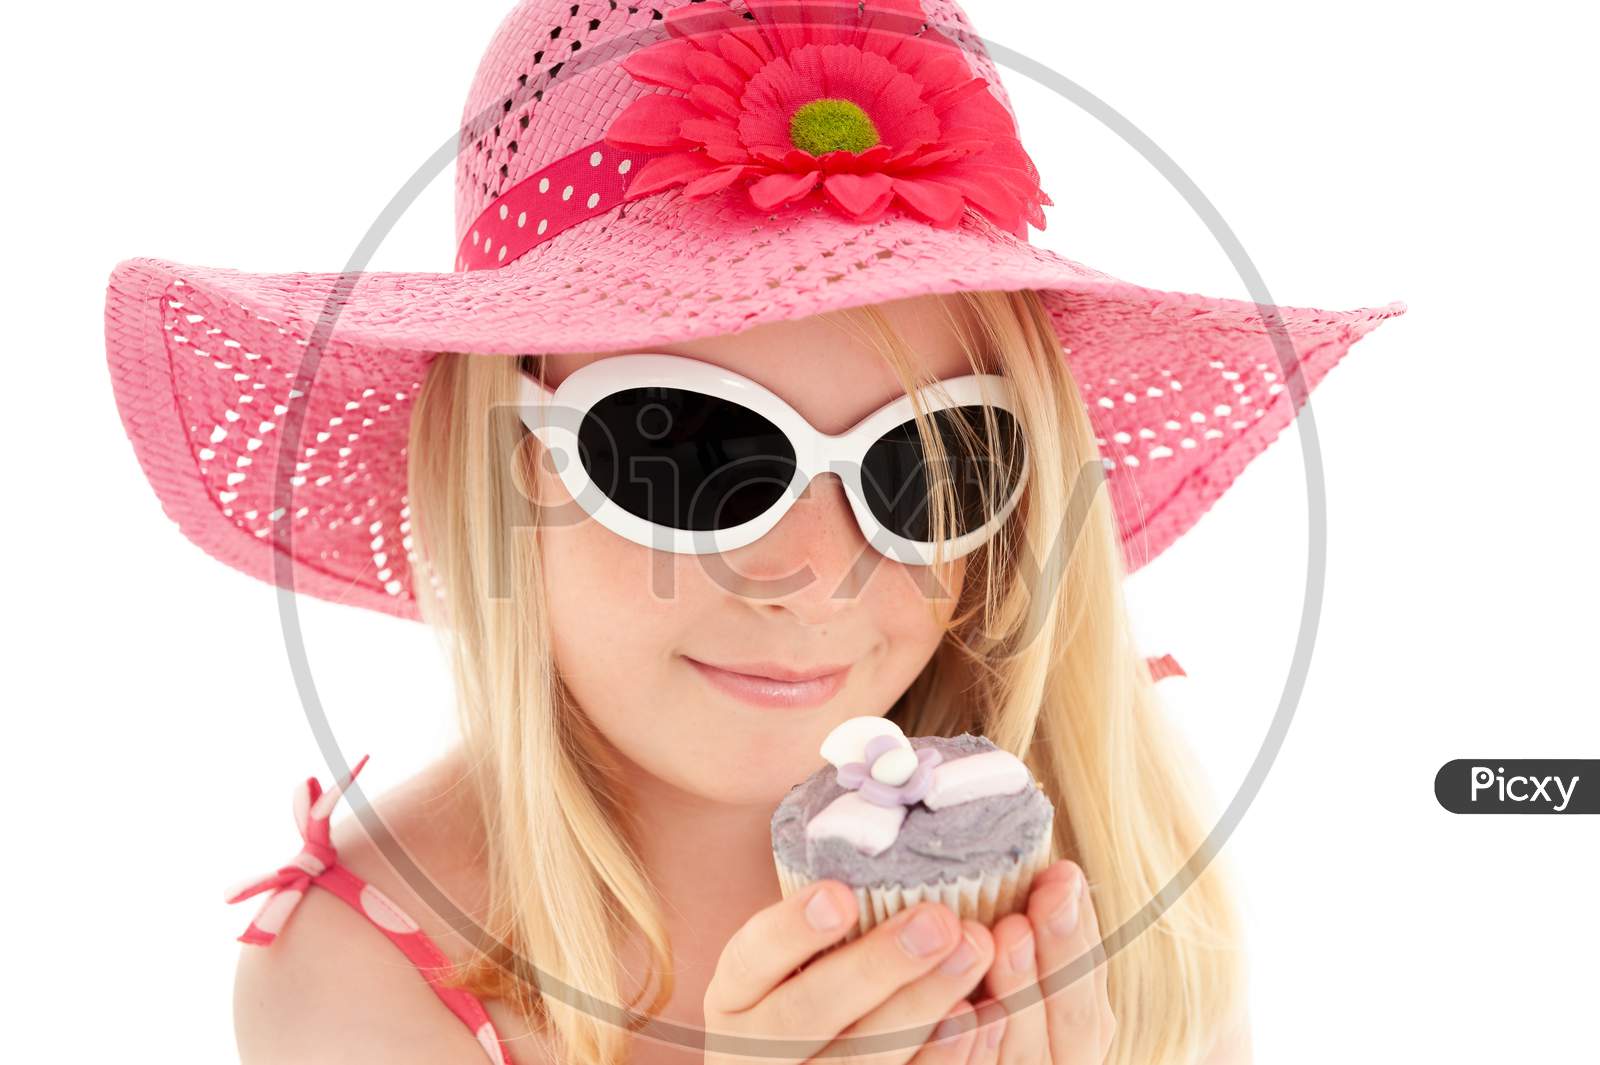 Beautiful Young Blonde Girl In Big Pink Floppy Hat And White Framed Sunglasses Looking At A Cup Cake. White Studio Background